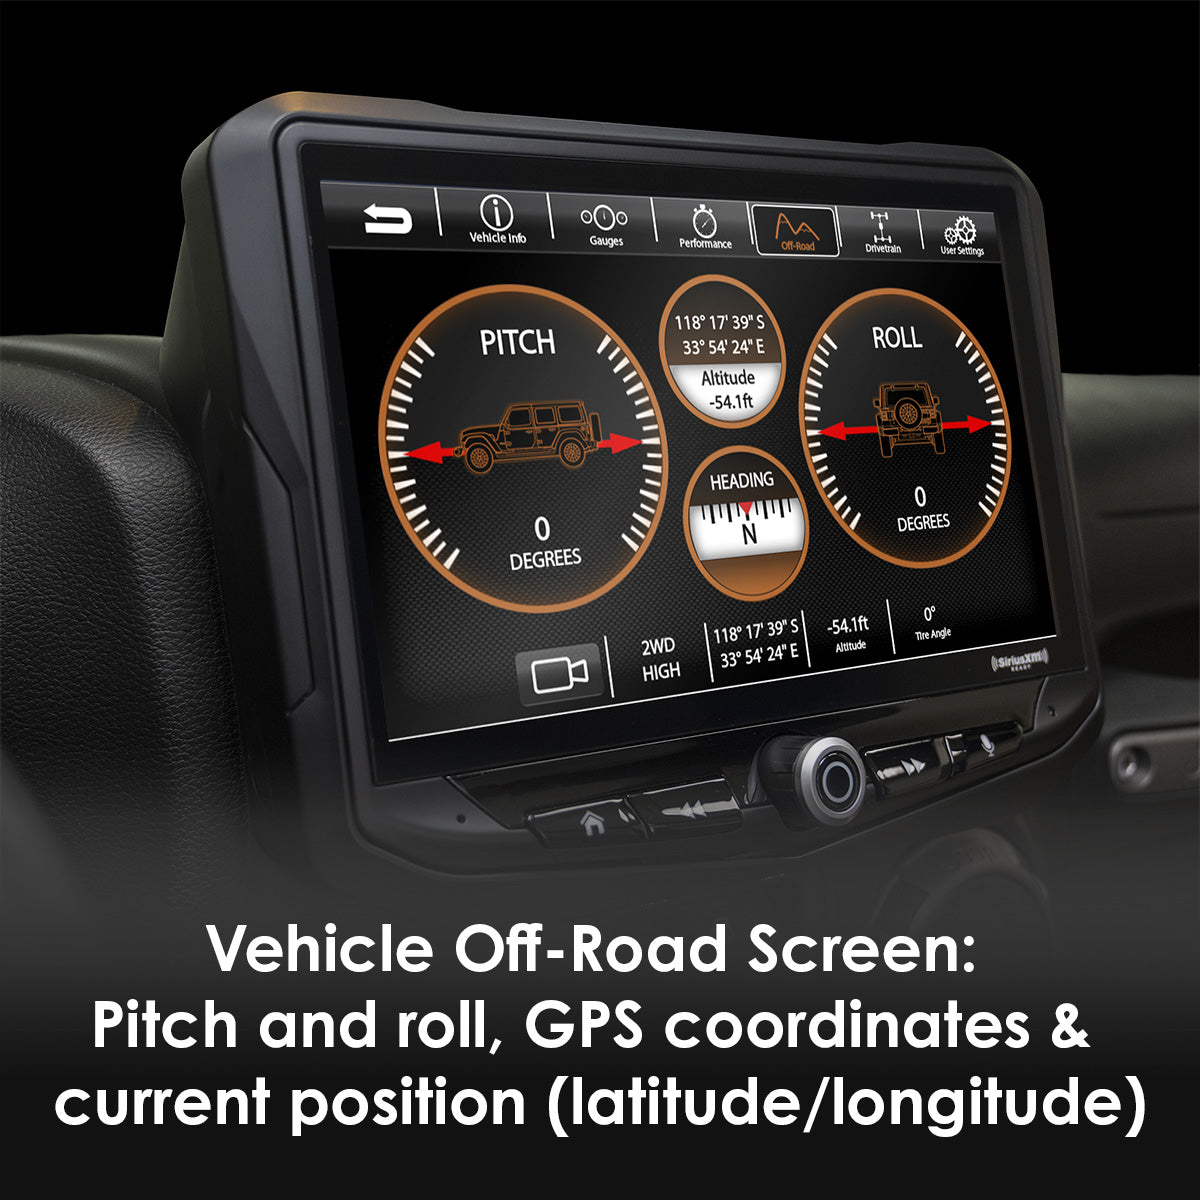 Stinger Jeep Wrangler JK (2011-2018) HEIGH10 10" Radio Fully Integrated Kit | Displays Vehicle Information and Off-Road Mode